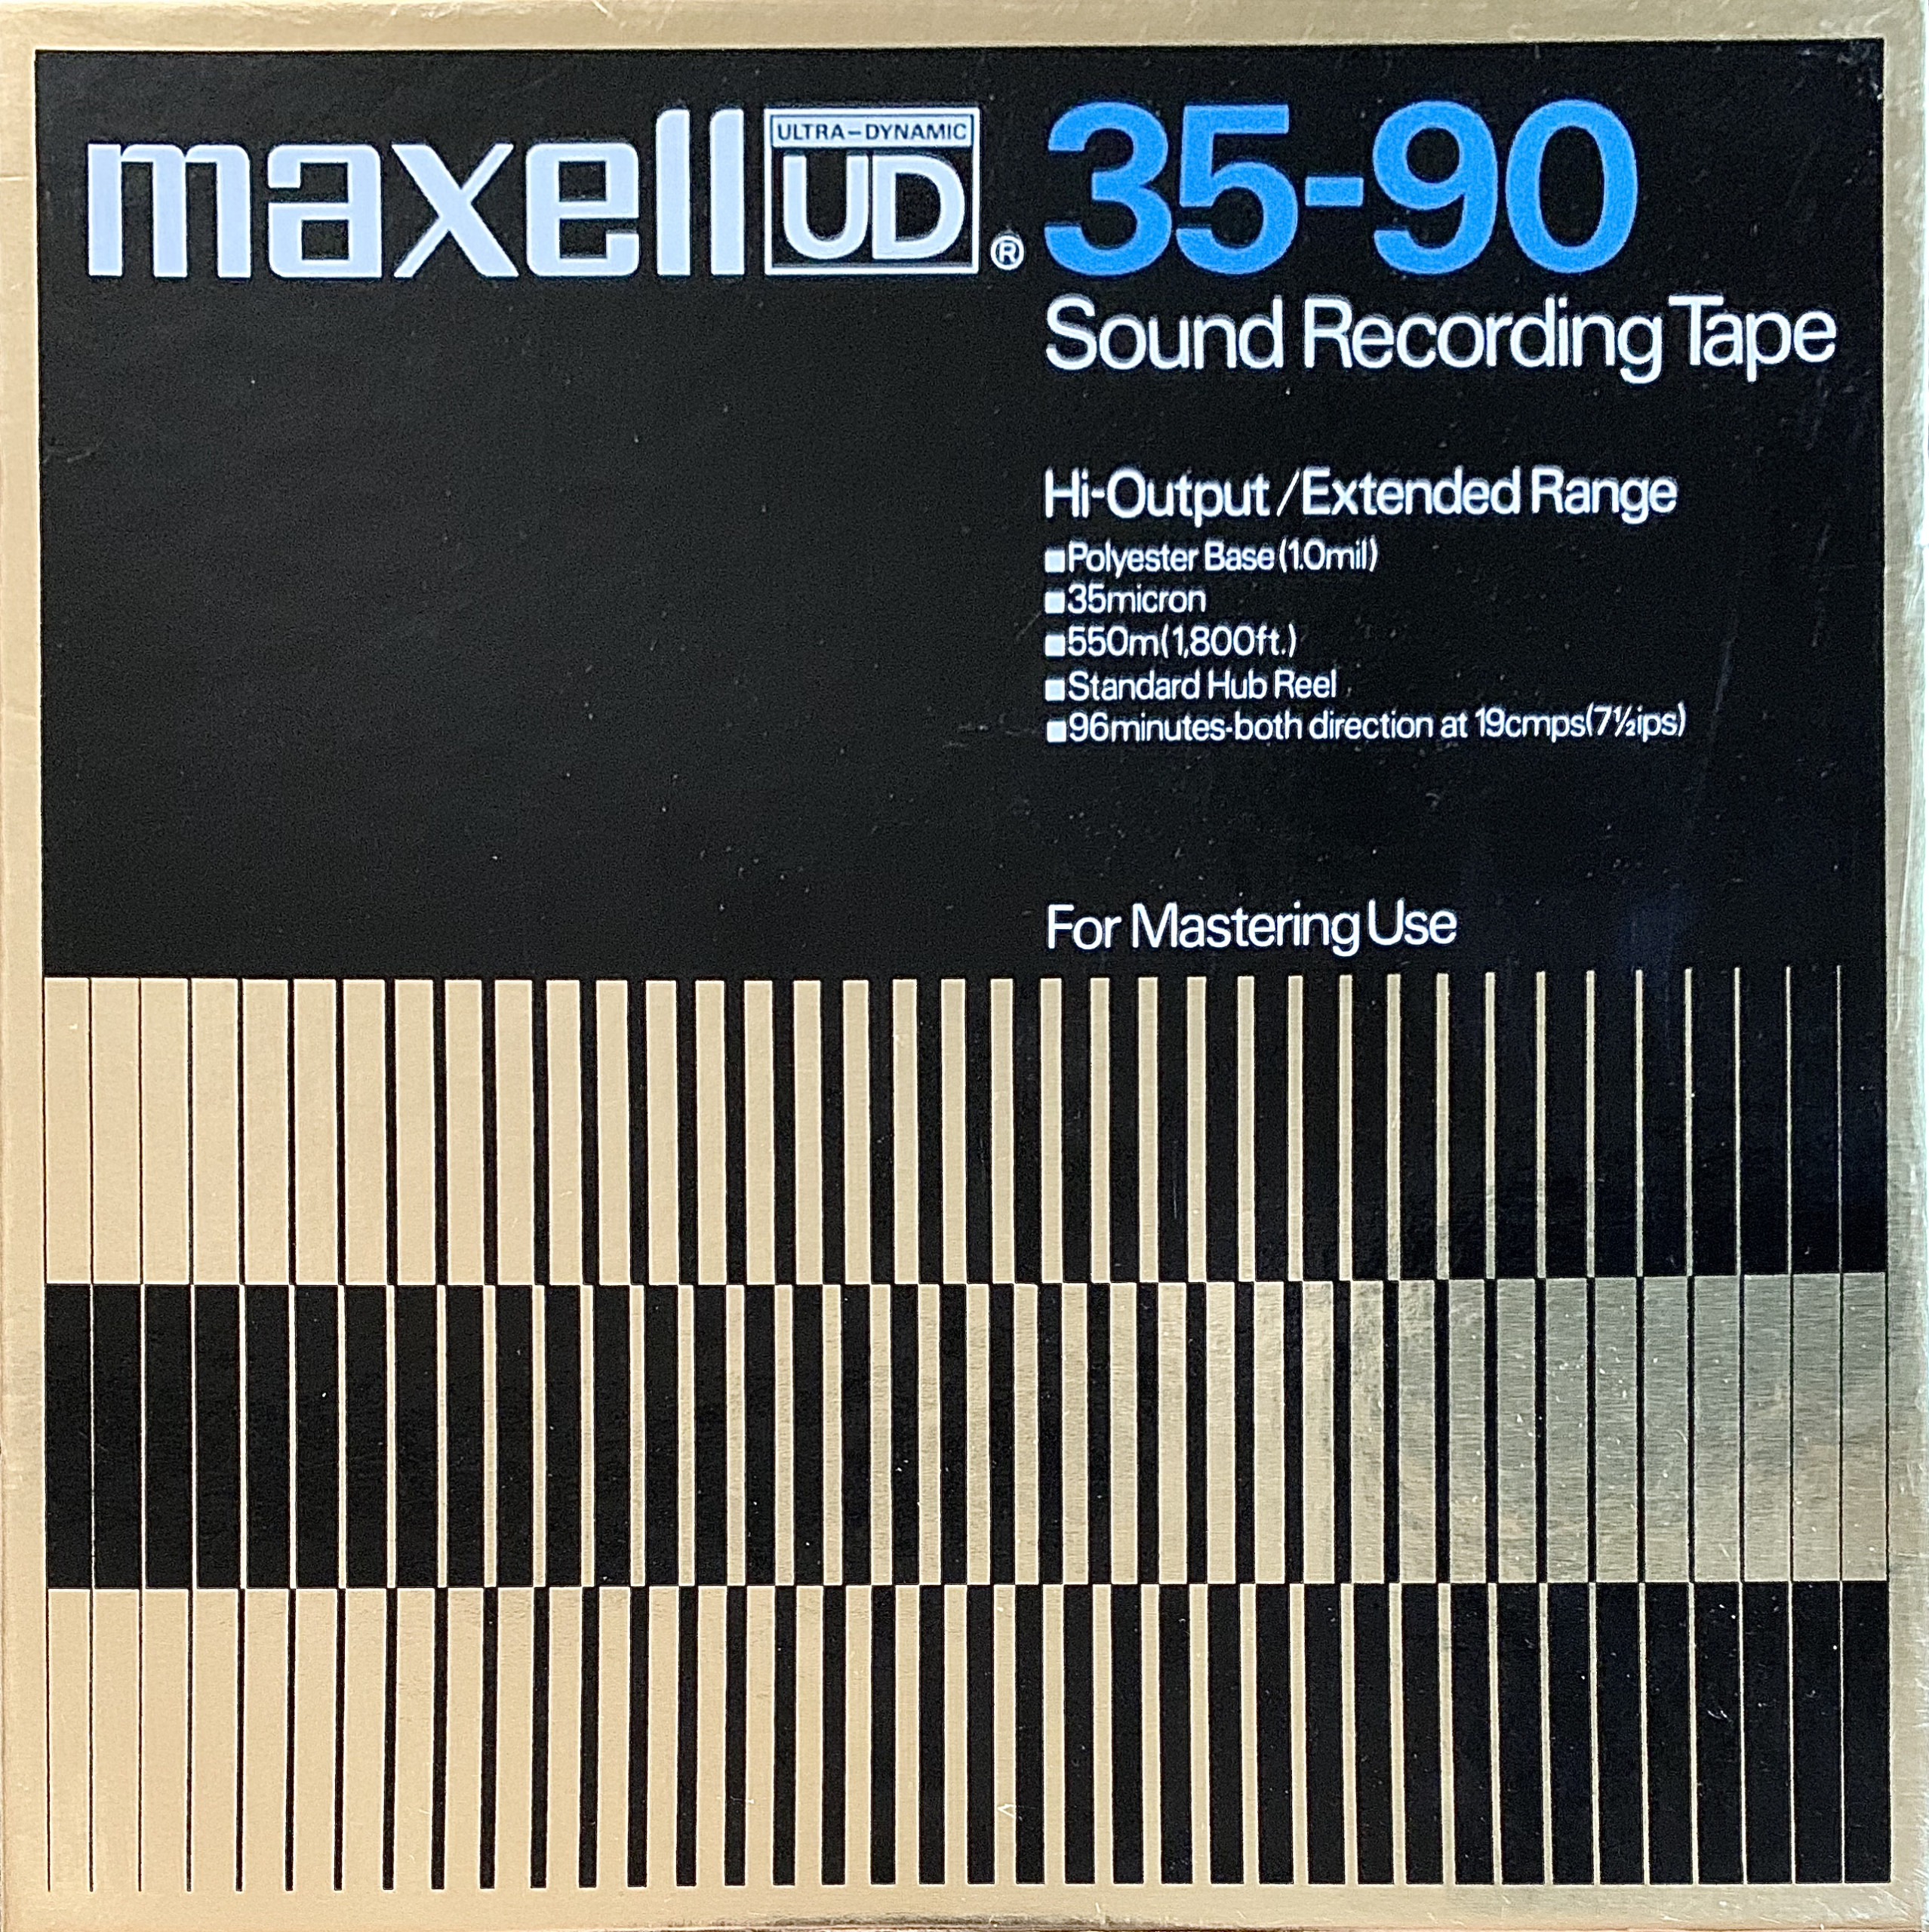 Maxell UD 35-90 Reel-to-Reel Sound Recording Tape - Books, Movies & Music -  Iron Mountain, Michigan, Facebook Marketplace